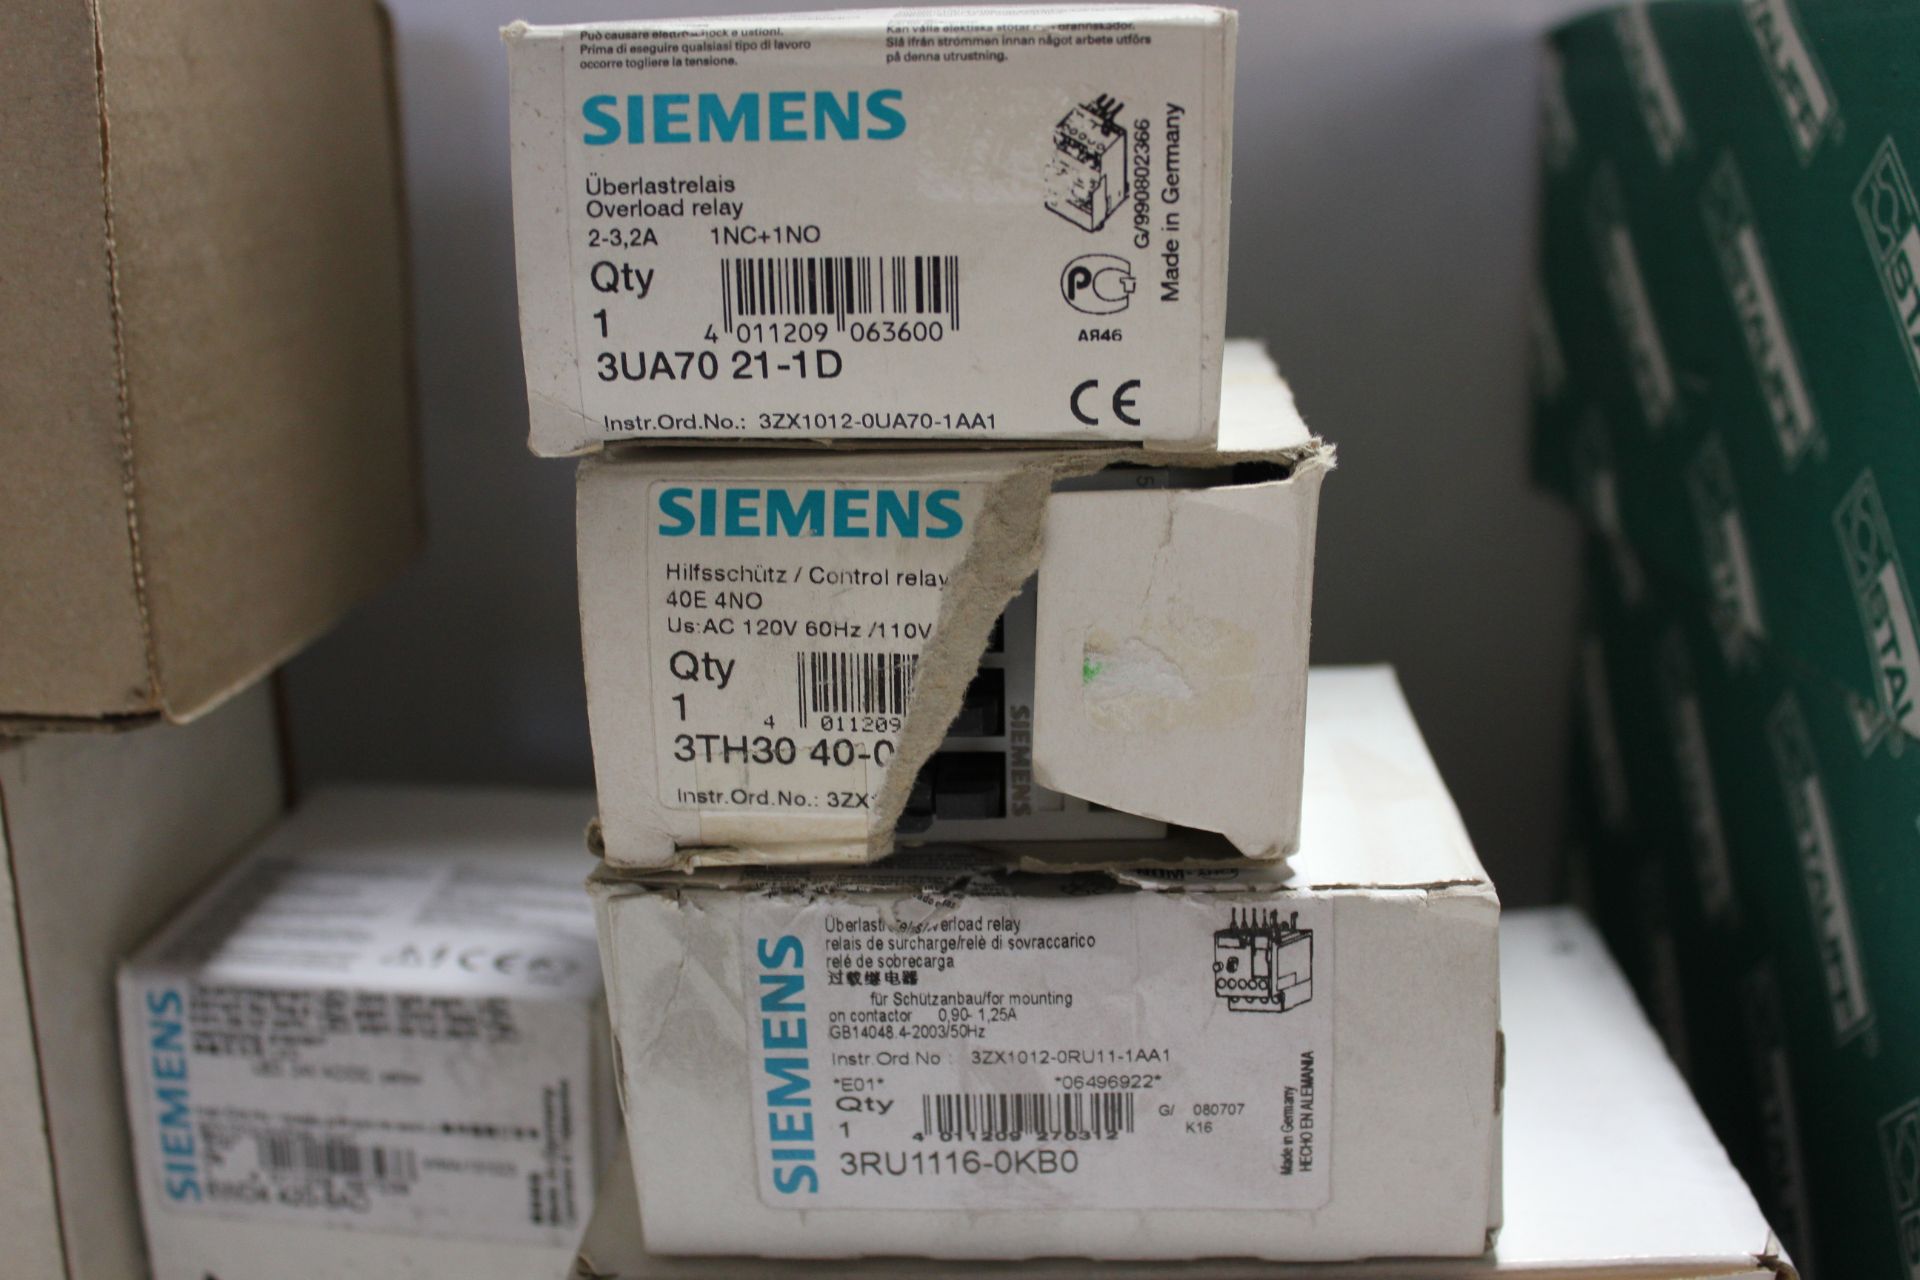 LOT OF NEW INDUSTRIAL AUTOMATION PARTS A/B SIEMENS,GE,OMRON,EATON, ETC - Image 7 of 12